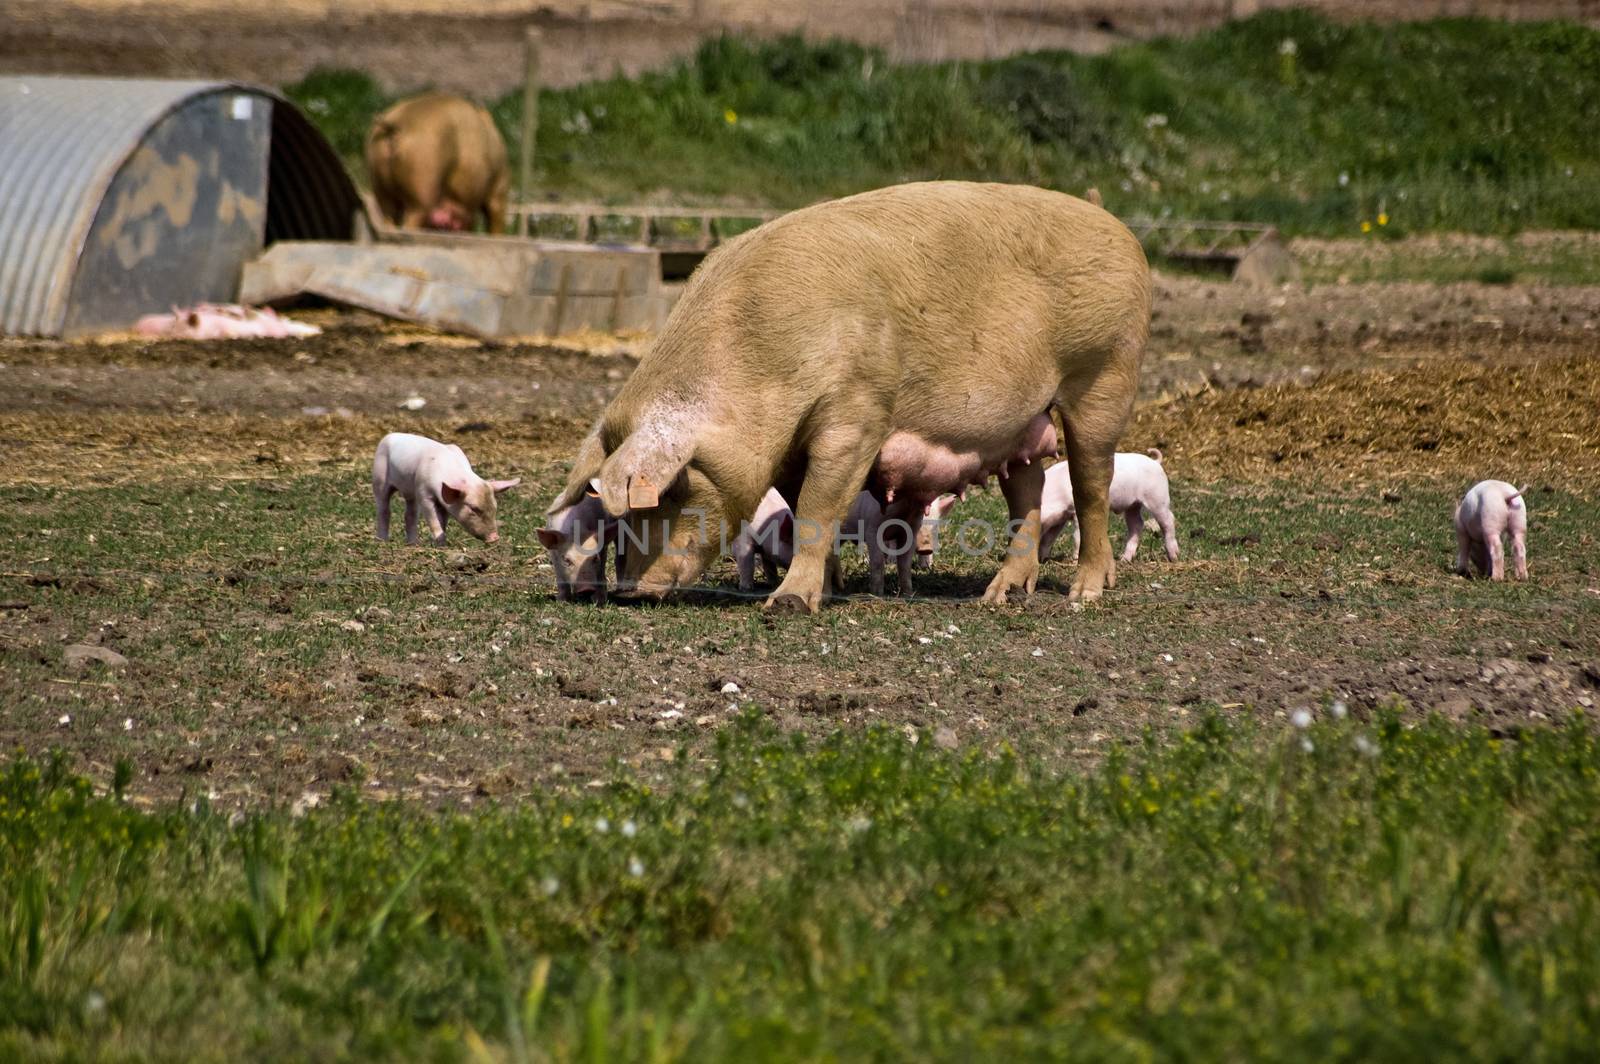 Sow with Piglets by BasPhoto